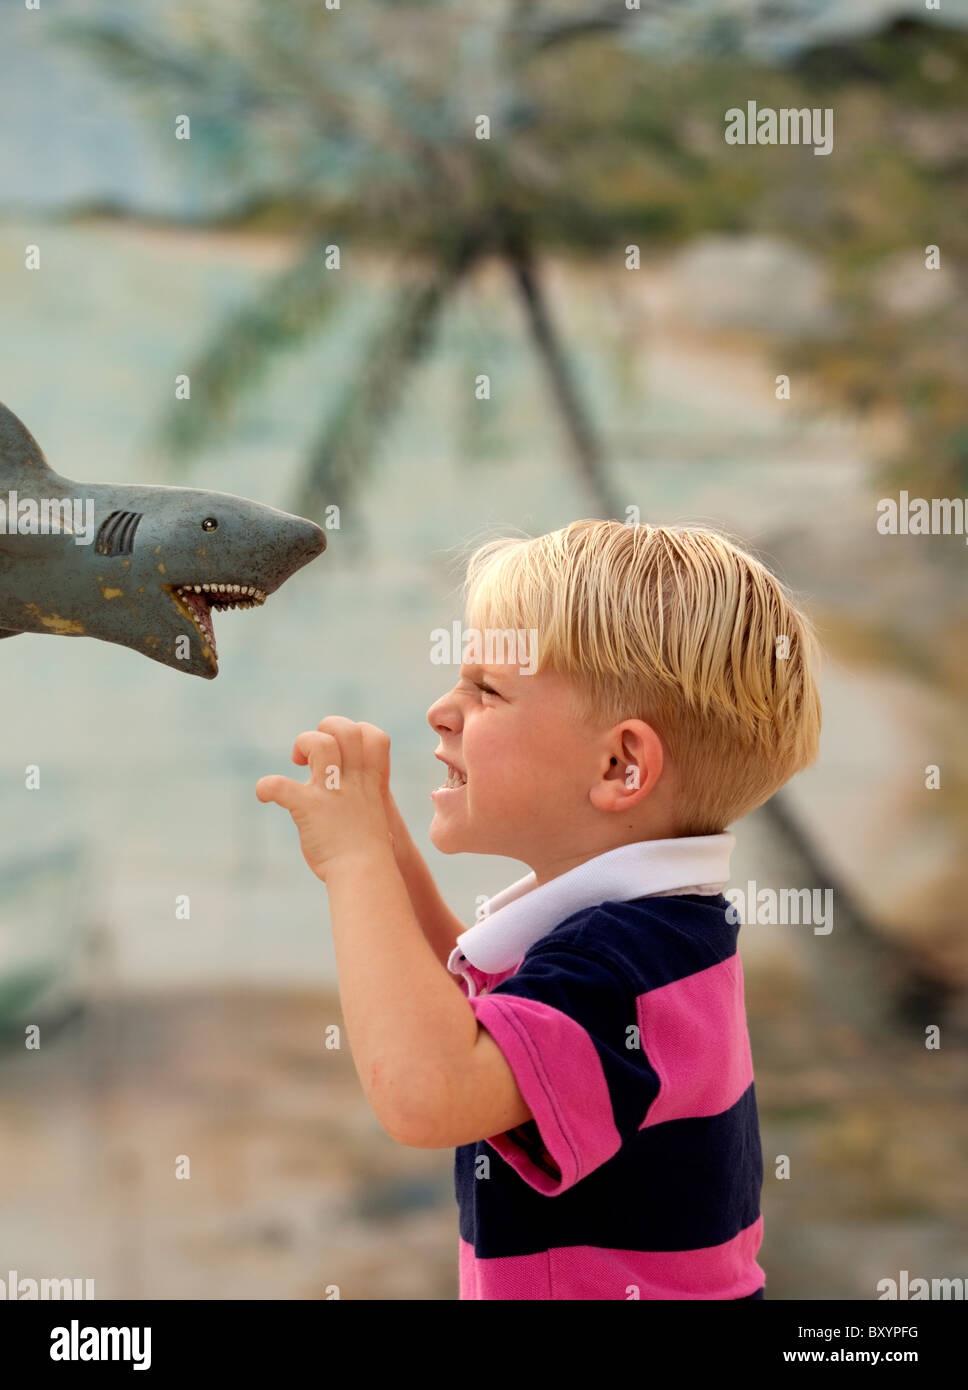 Young boy growling at toy shark Stock Photo